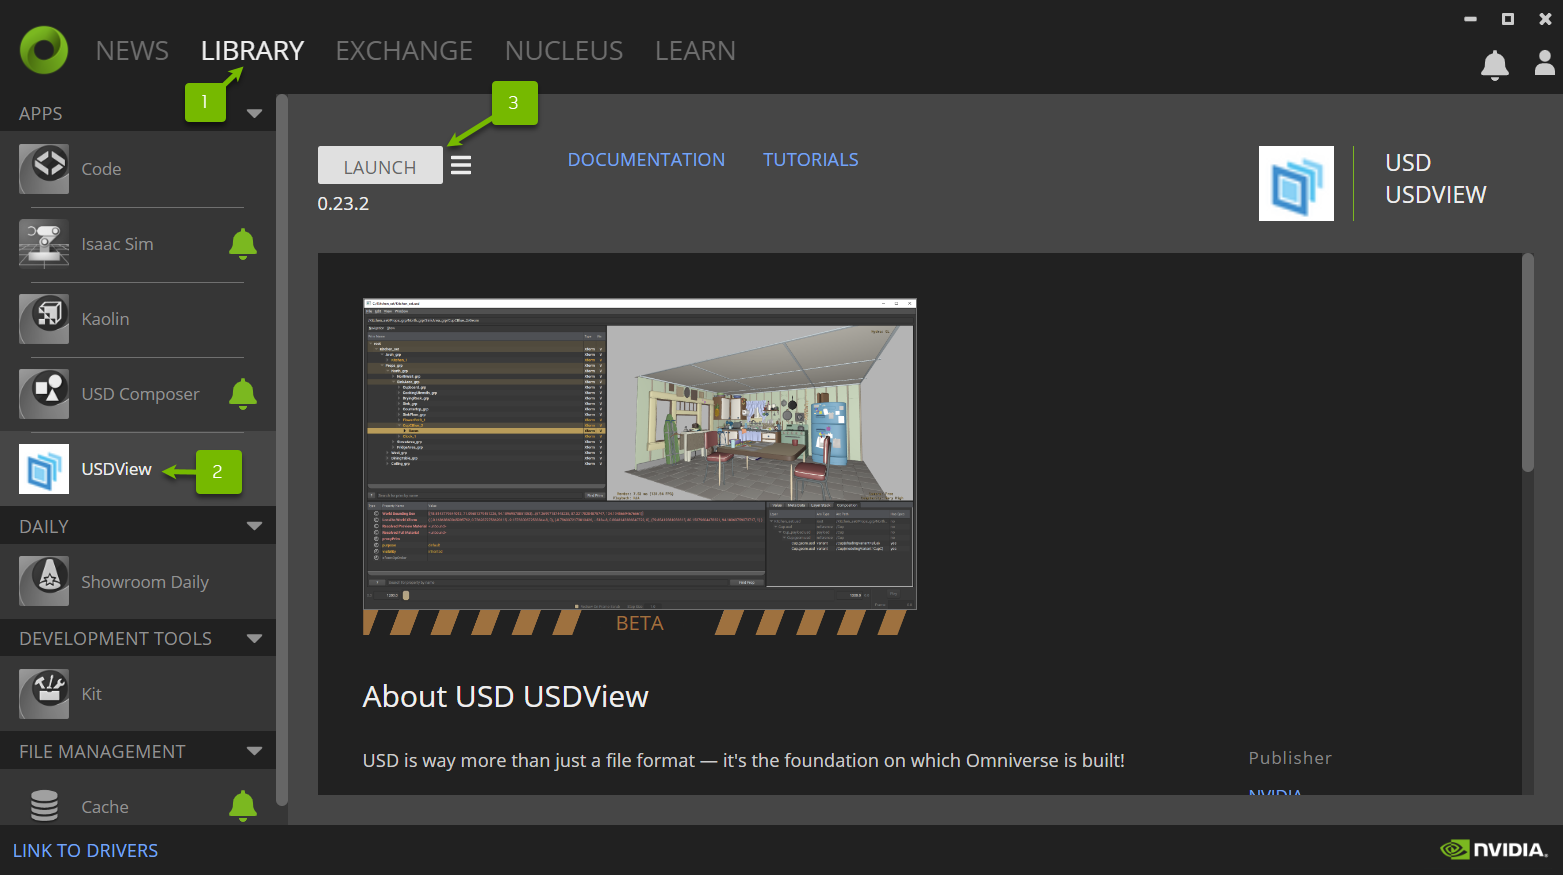 How to launch USDView from the Omniverse Launcher.